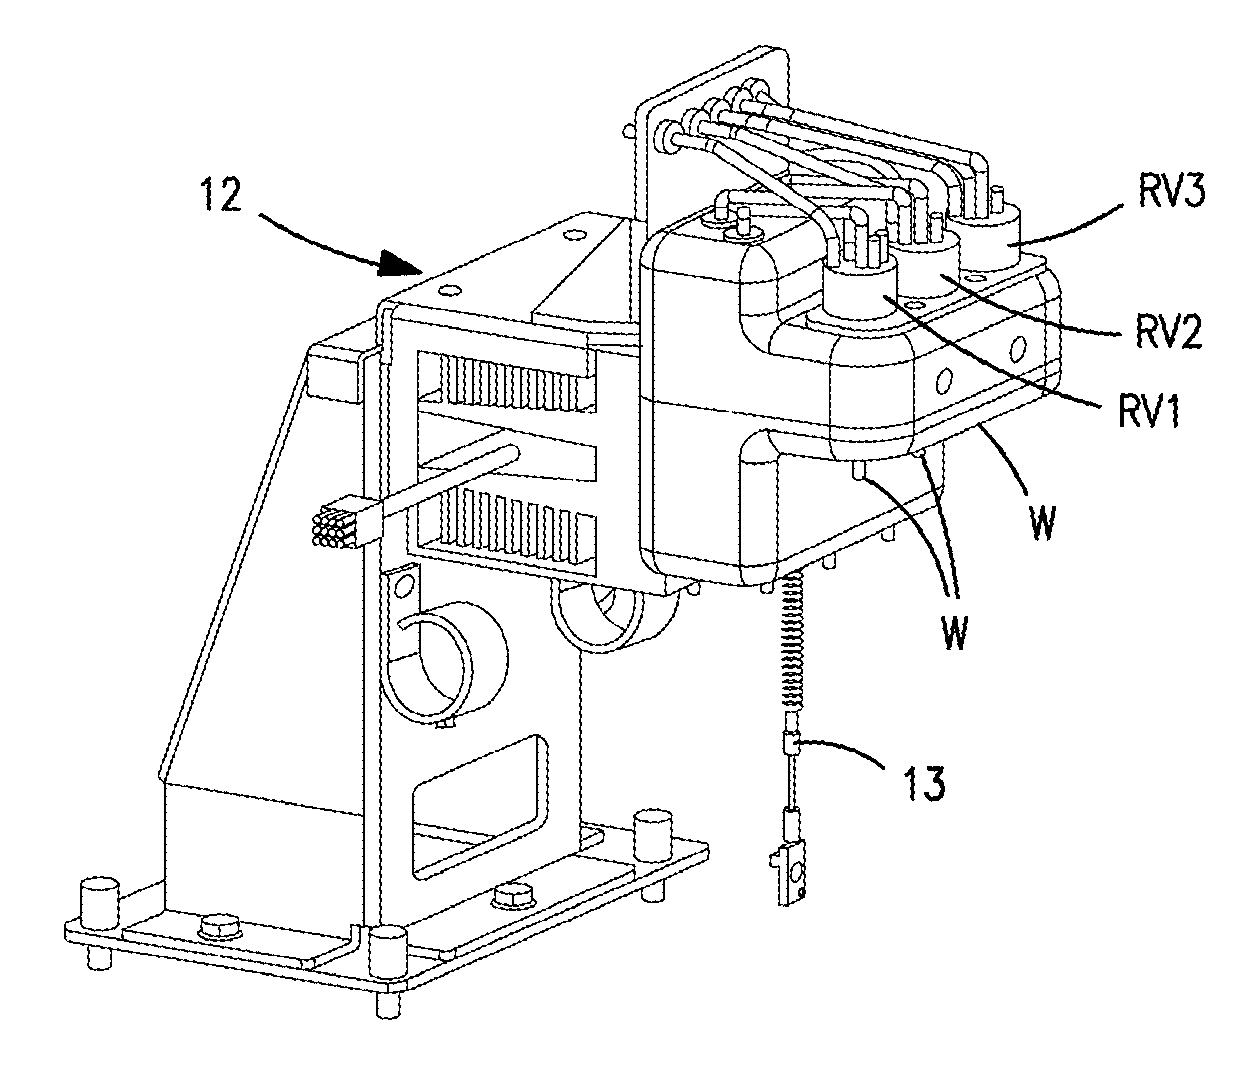 Method and apparatus for controlling reaction temperature in bio-chemical instruments